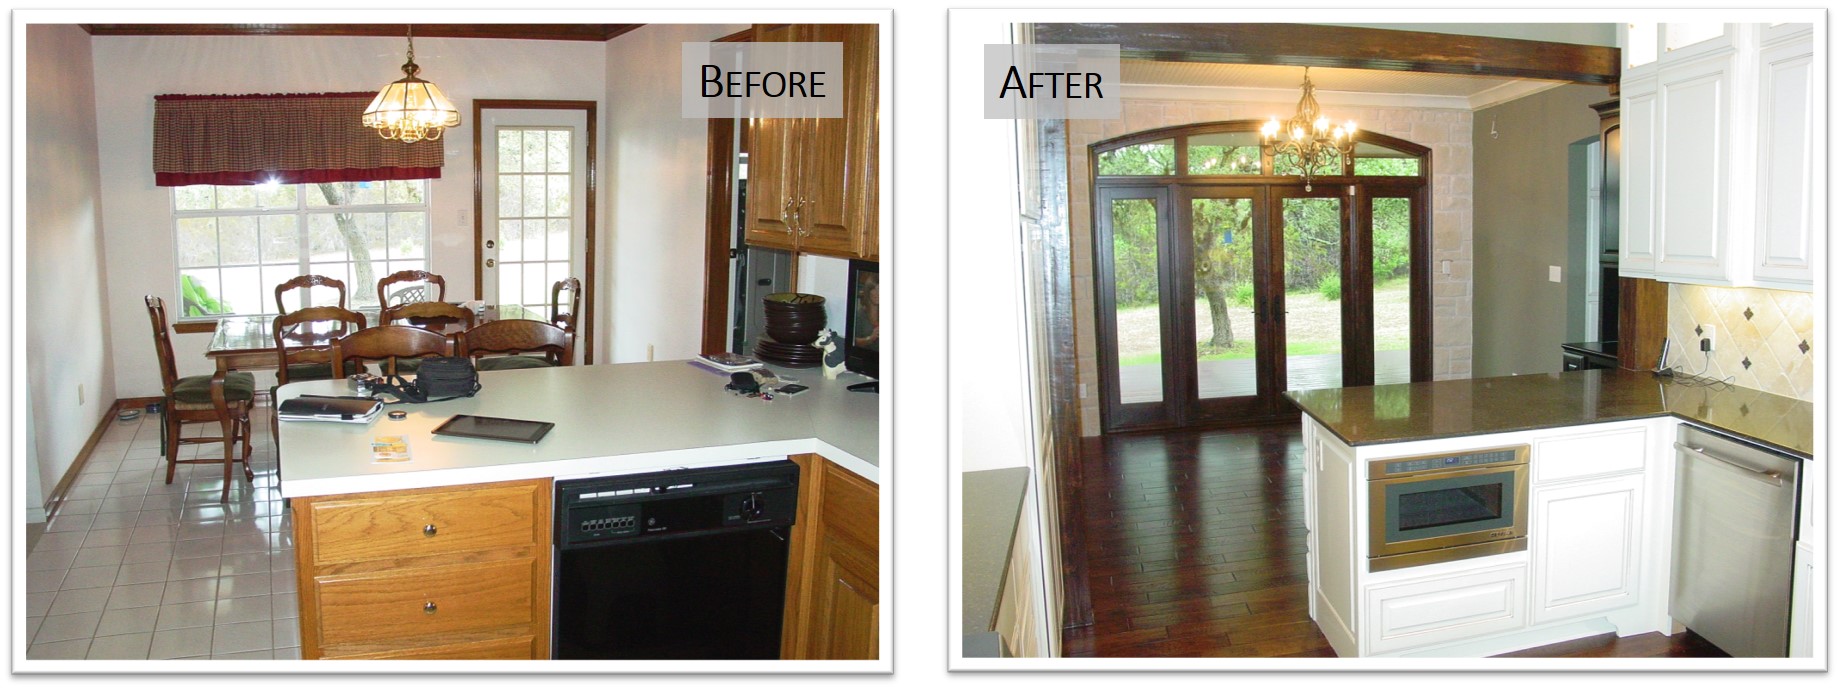 13205 CH, Kitchen1, Before and After, Bear Creek Homes.jpg